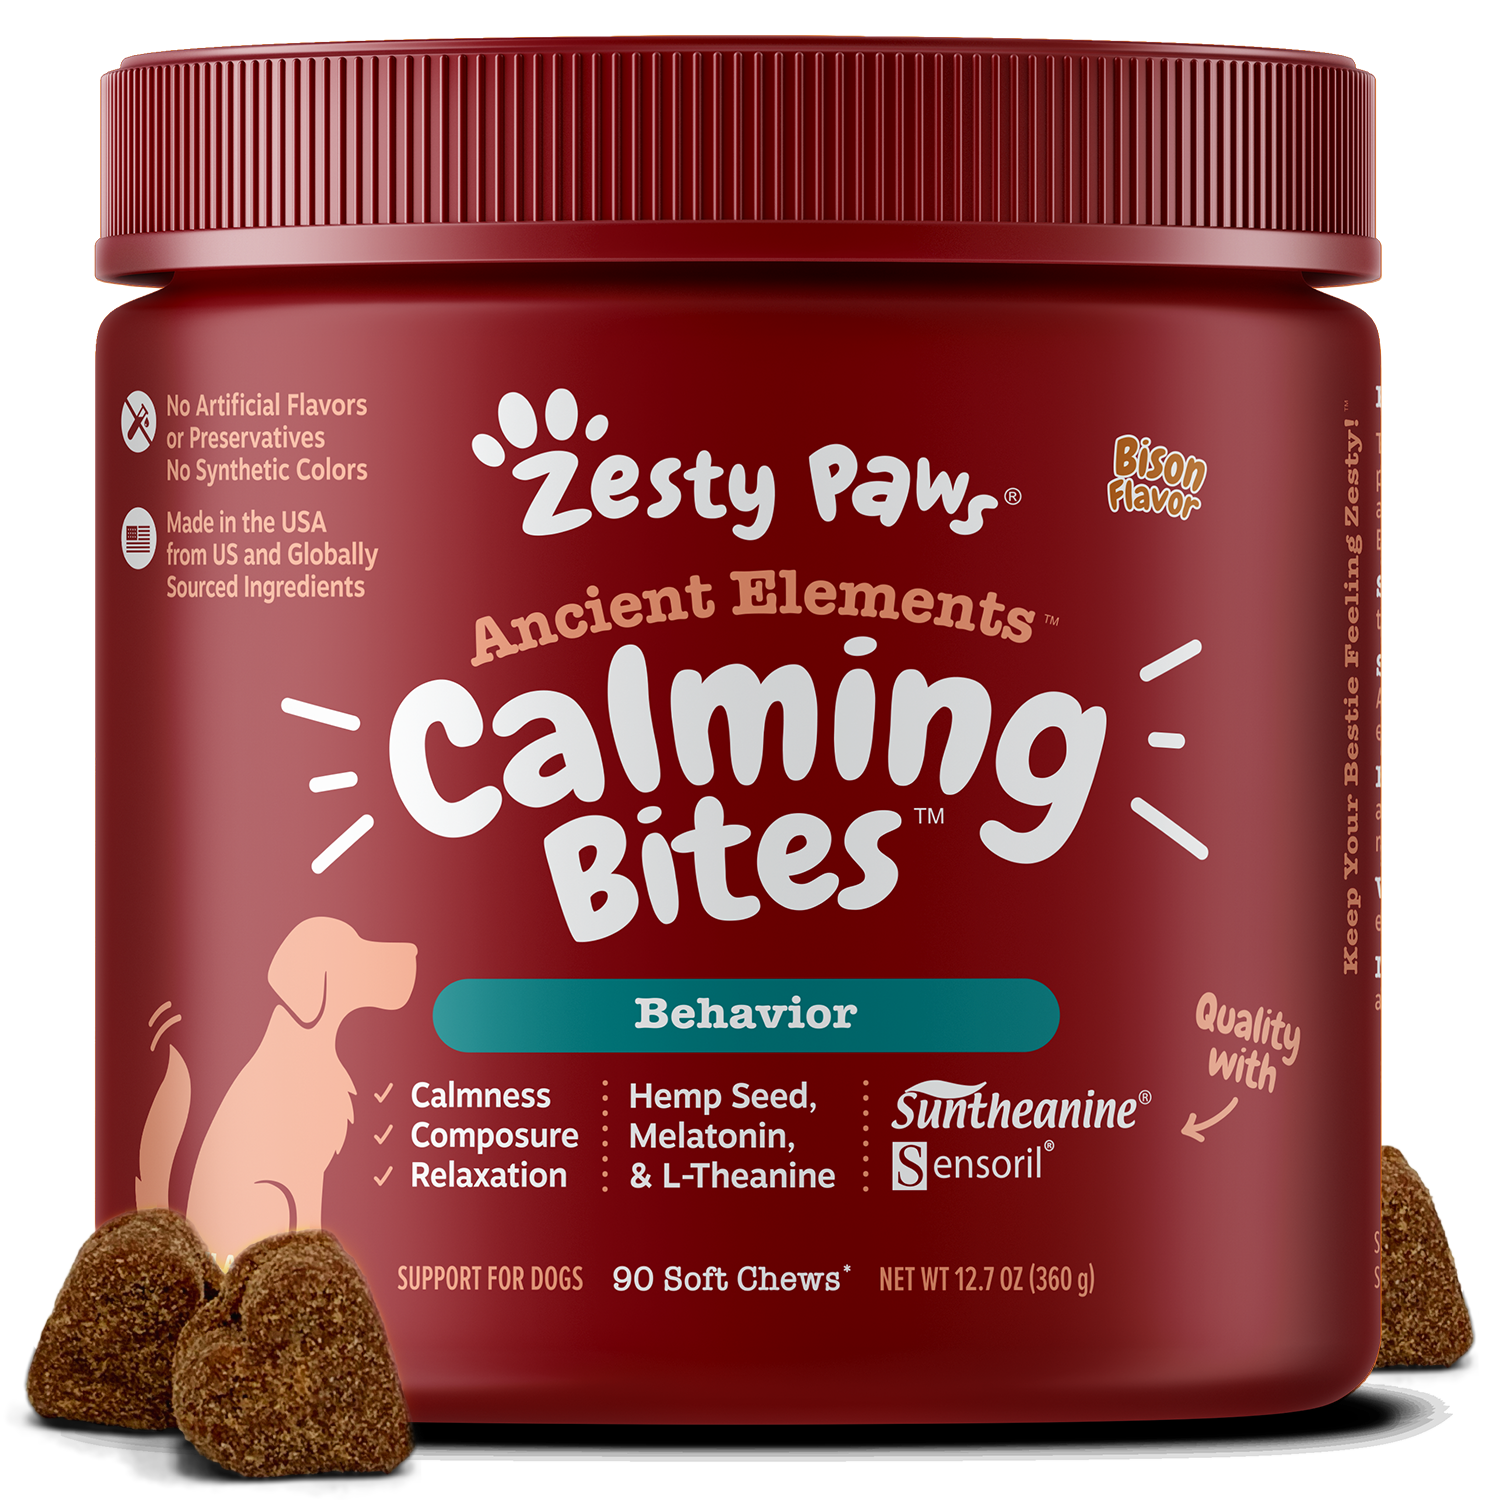 Ancient Elements™ Calming Bites™ for Dogs